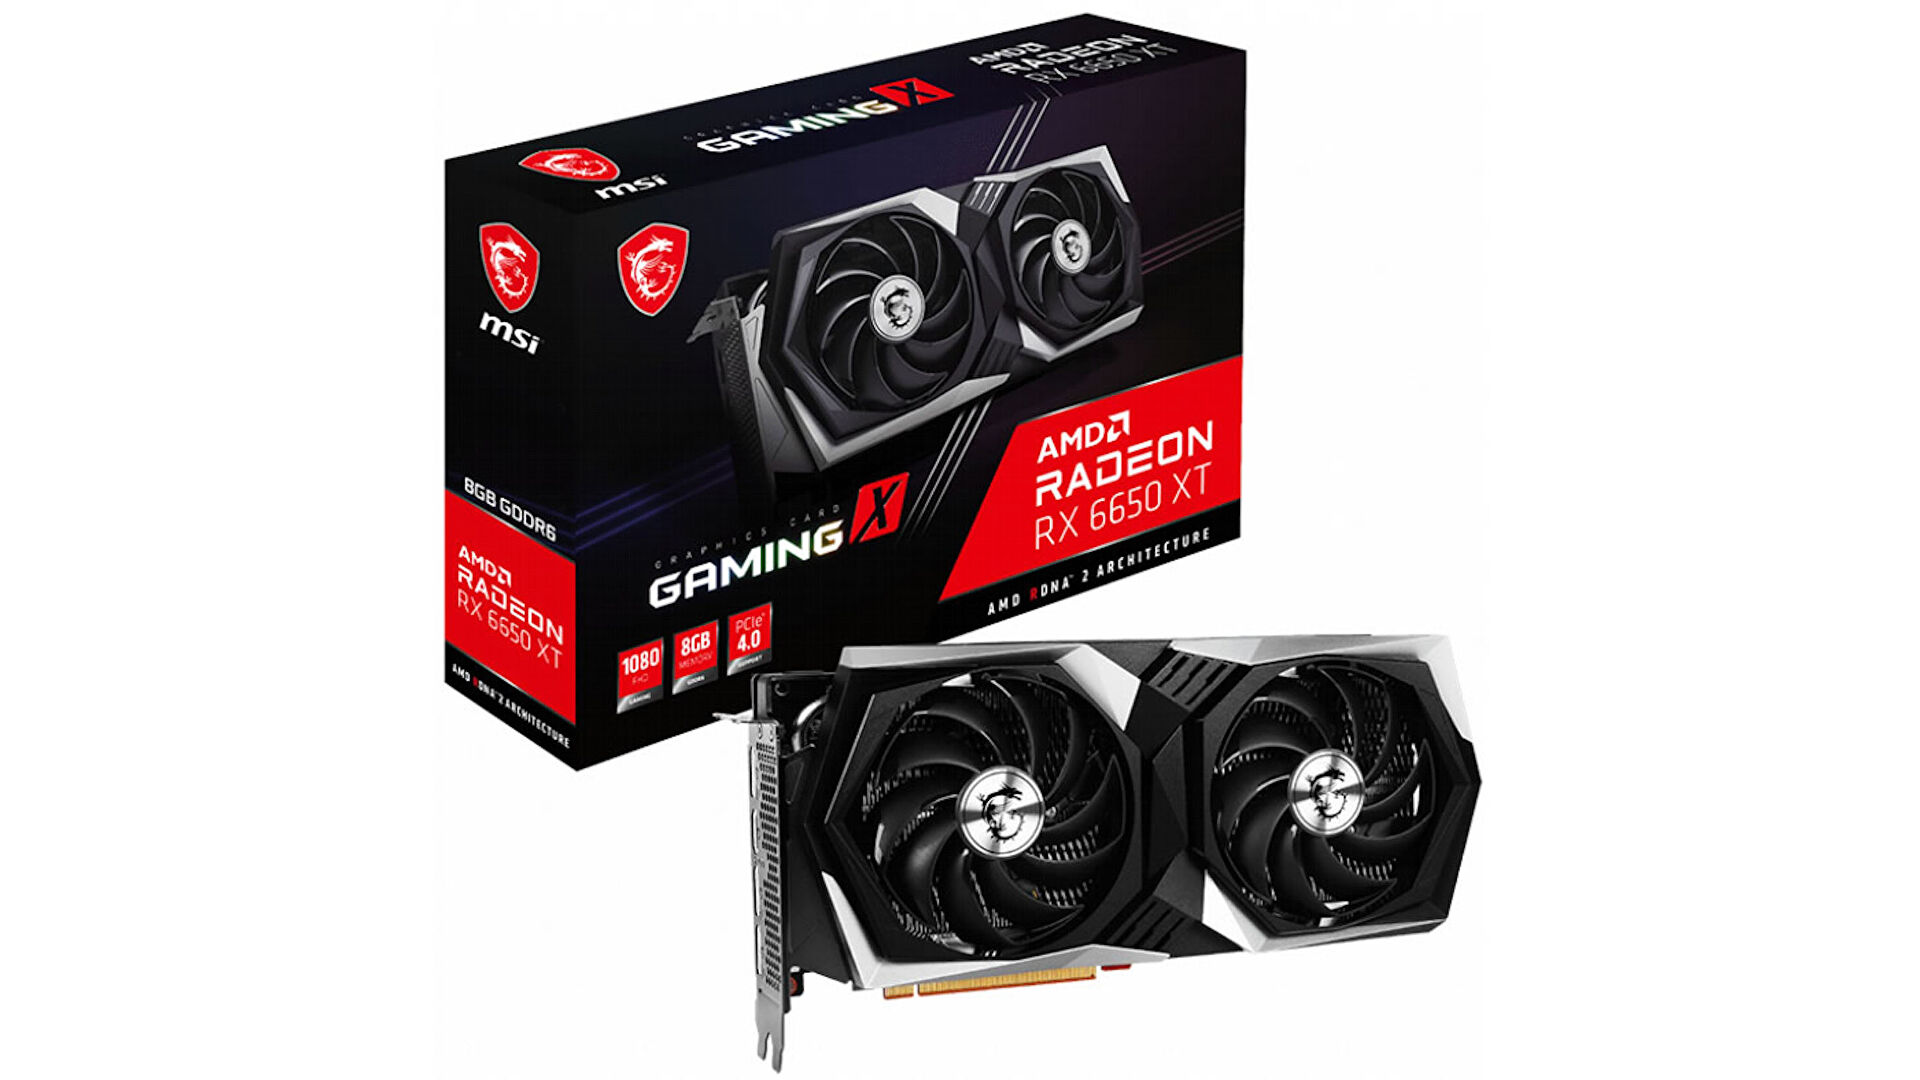 MSI’s RX 6650 XT graphics card is down to £300 with two free games